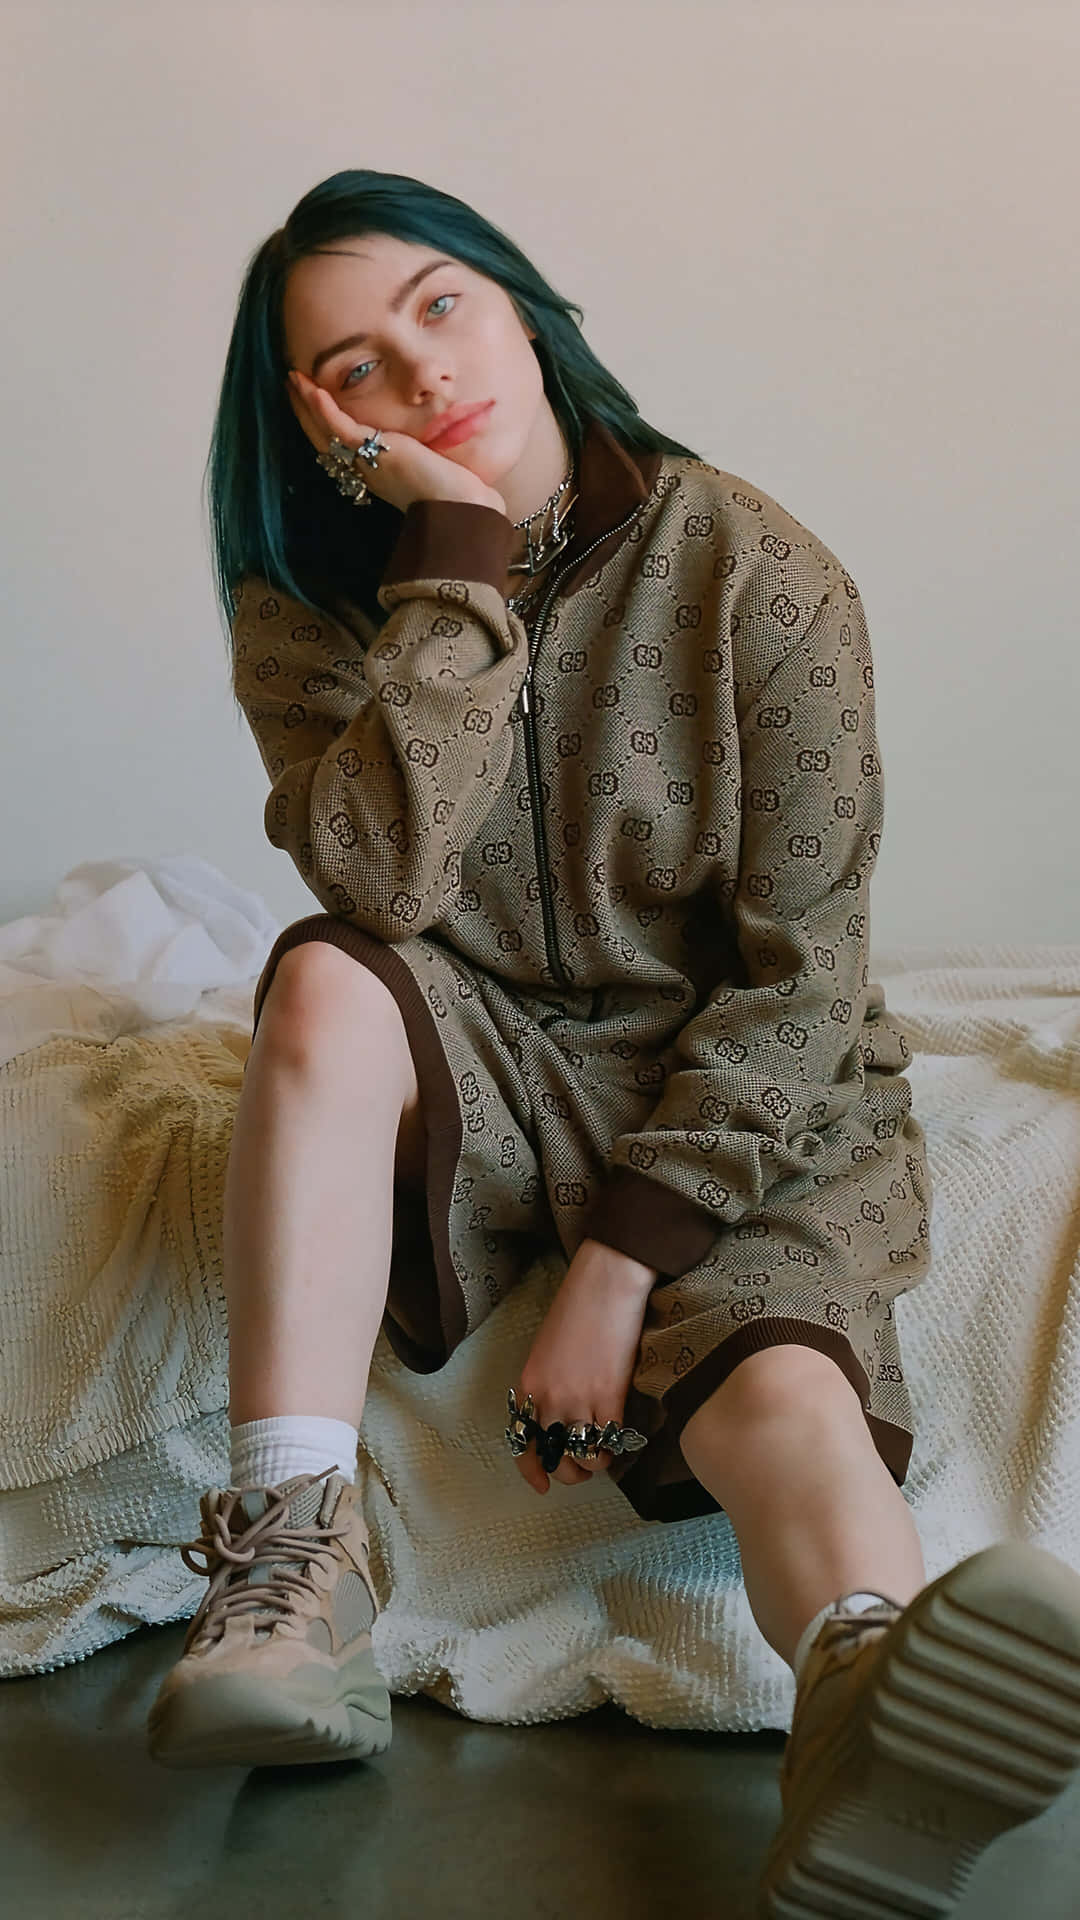 Billie Eilish, the 17-year-old singer and songwriter